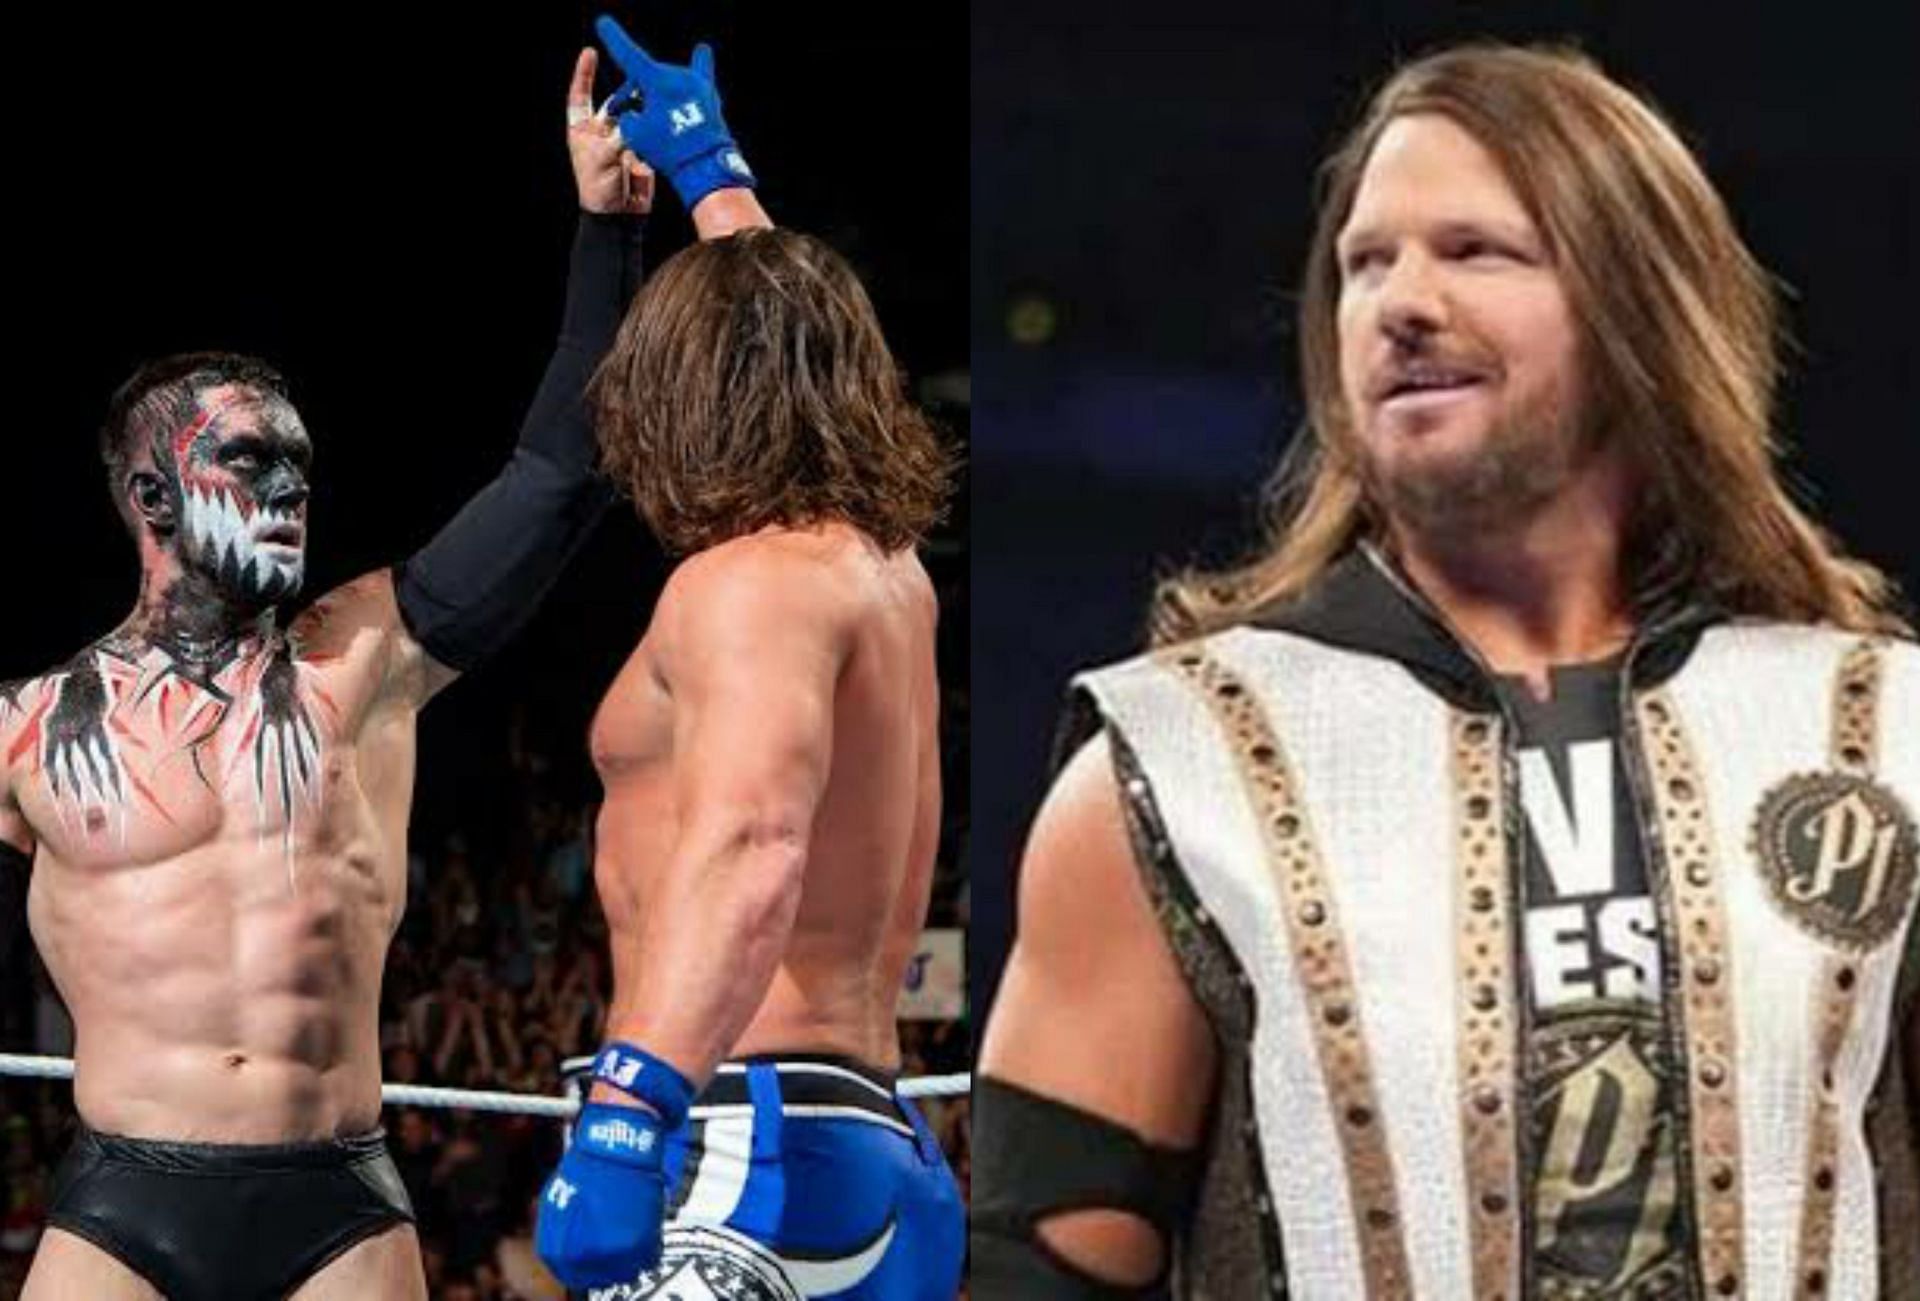 Will AJ Styles join The Judgment Day in the coming days?